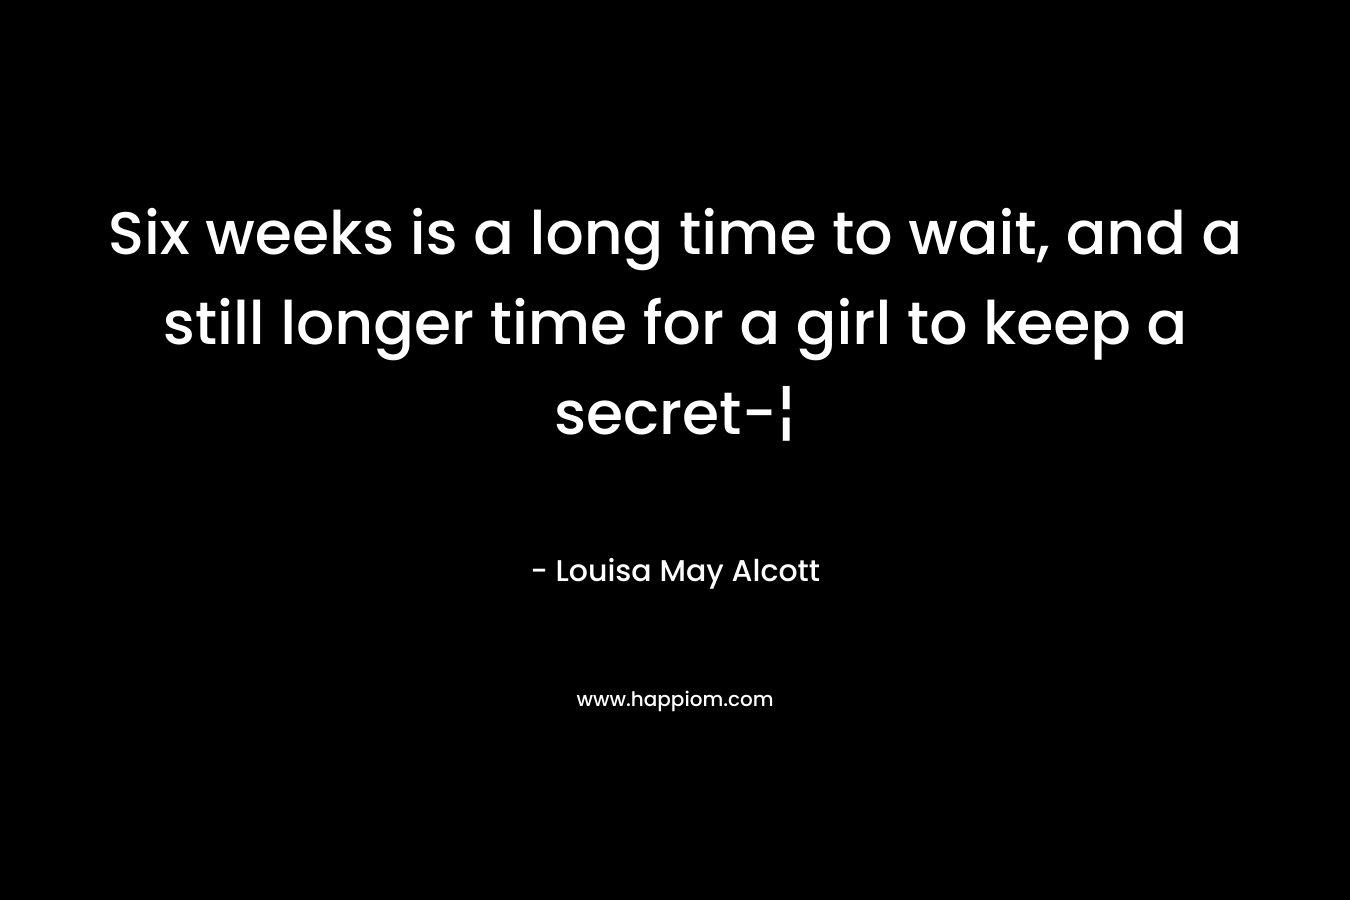 Six weeks is a long time to wait, and a still longer time for a girl to keep a secret-¦ – Louisa May Alcott